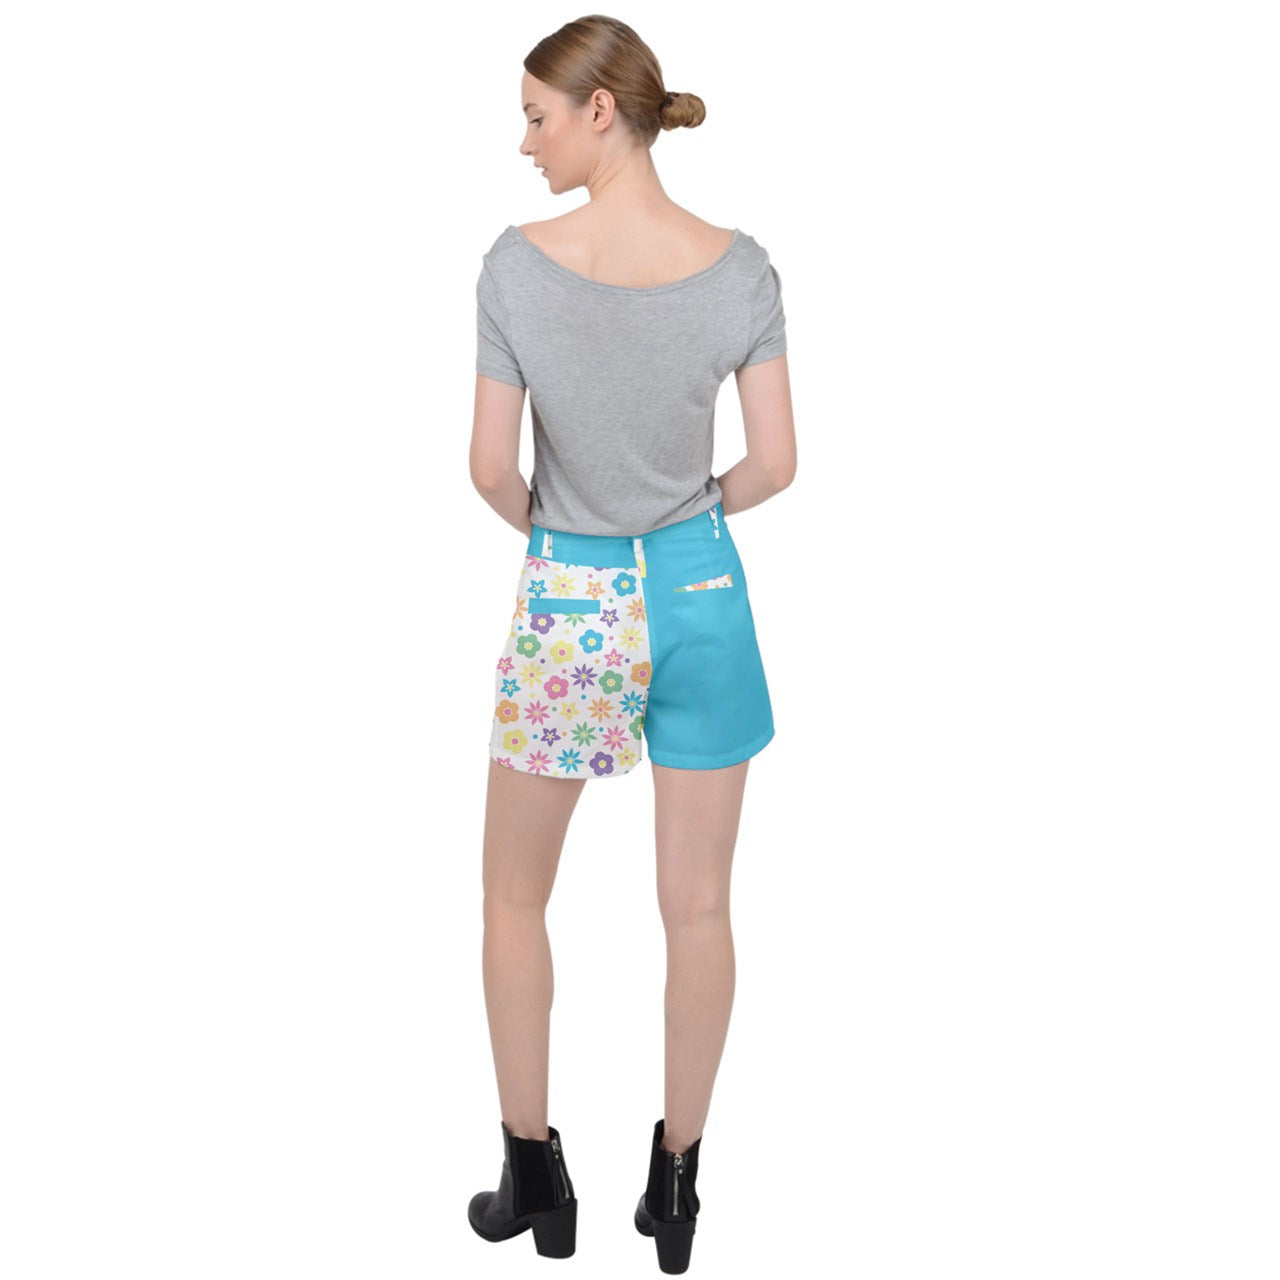 Retro Flowers Ripstop Shorts - White with Blue Accents